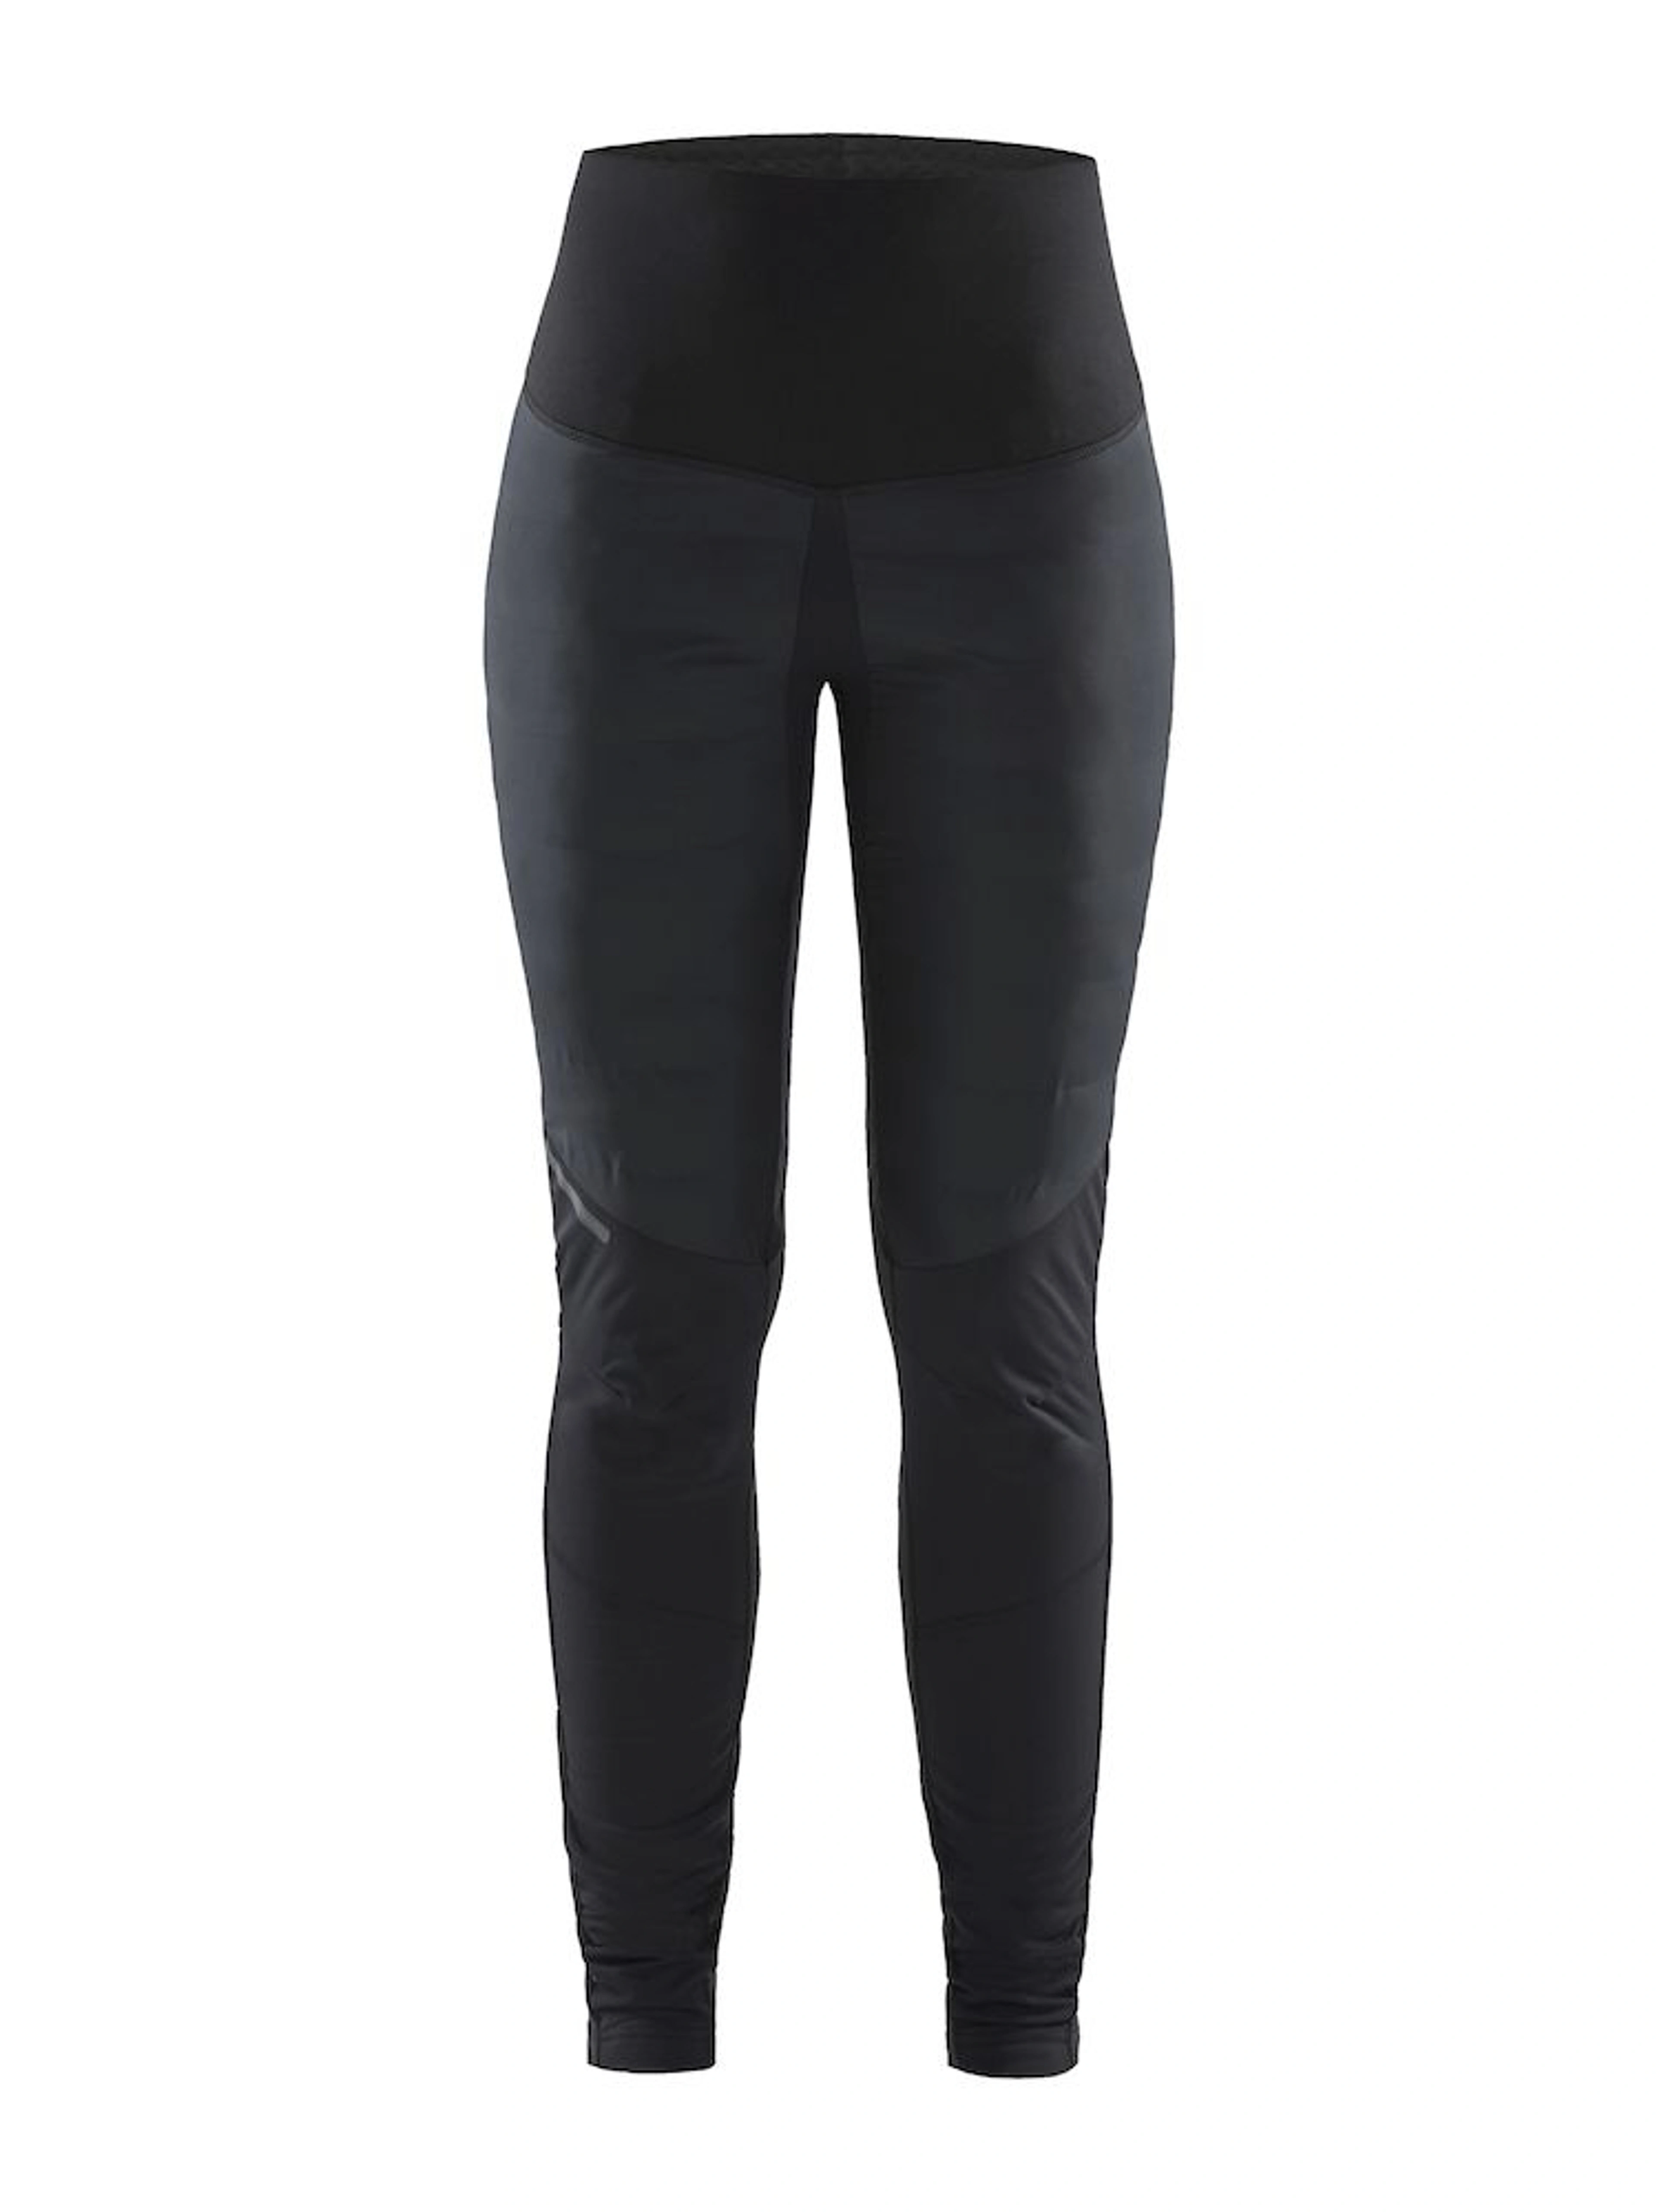 Adv Pursuit Thermal Tights W